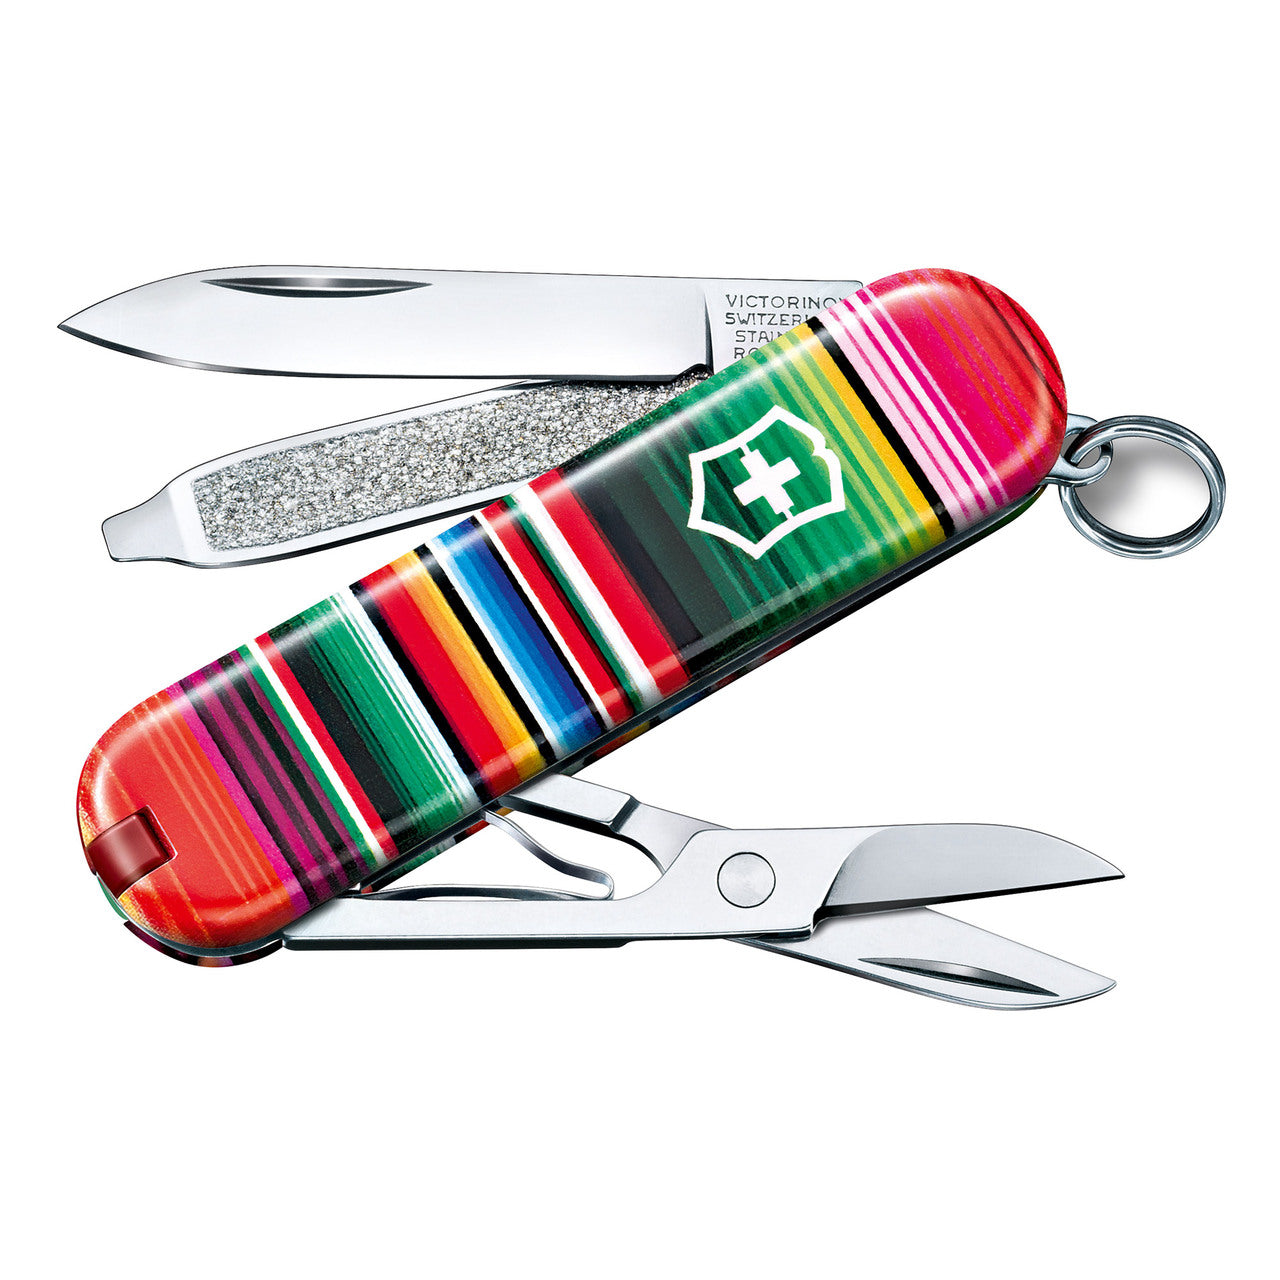 Victorinox Classic Swiss Army Knife - Mexican Zarape Limited Edition